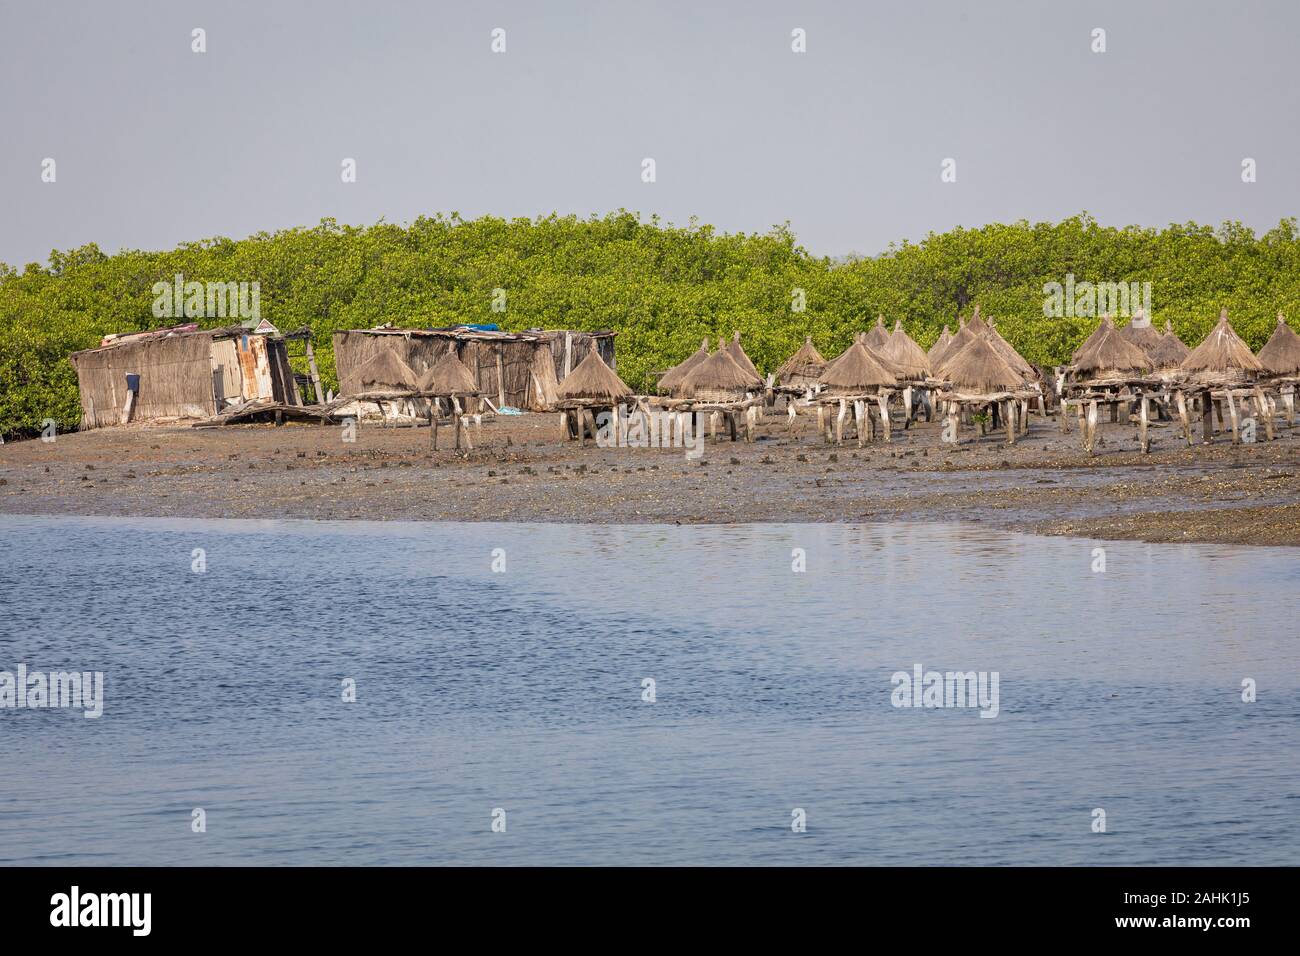 View over historic Fadiauth Island. Senegal. West Africa. Stock Photo